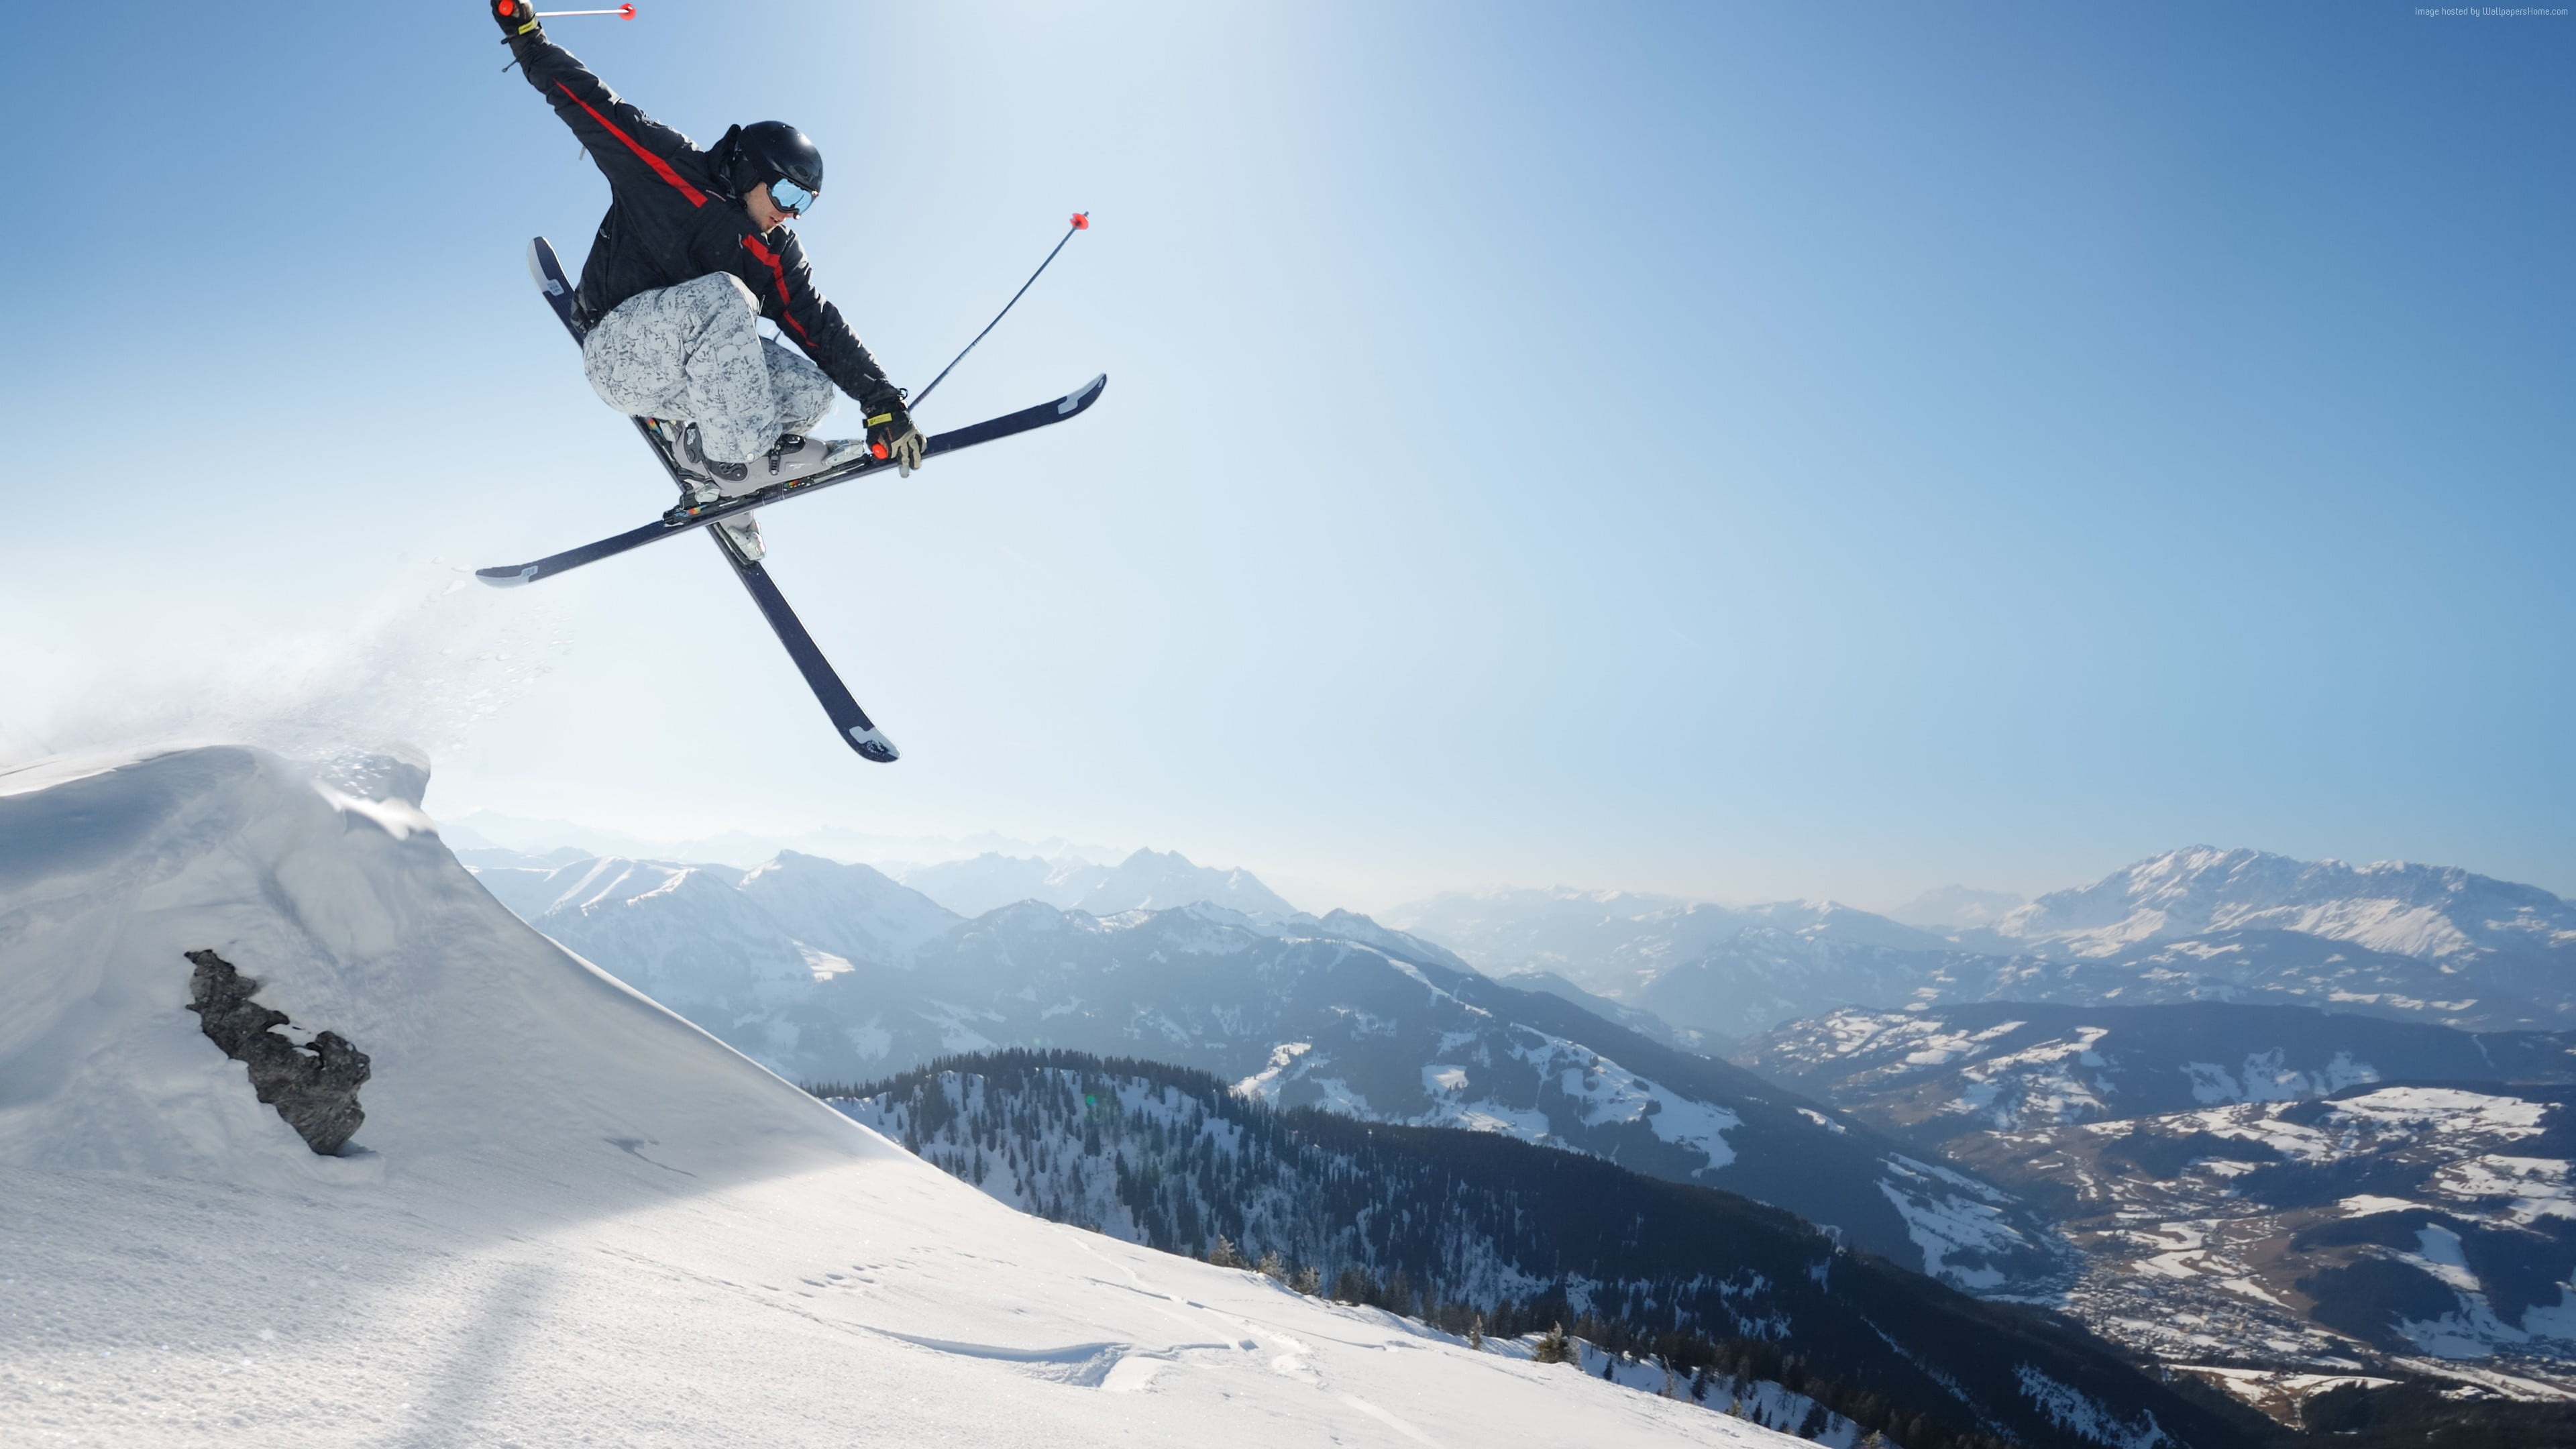 Jumping: Extreme winter sport, Downhill in a wavy course, Mountain skiing, Powder skiing. 3840x2160 4K Background.